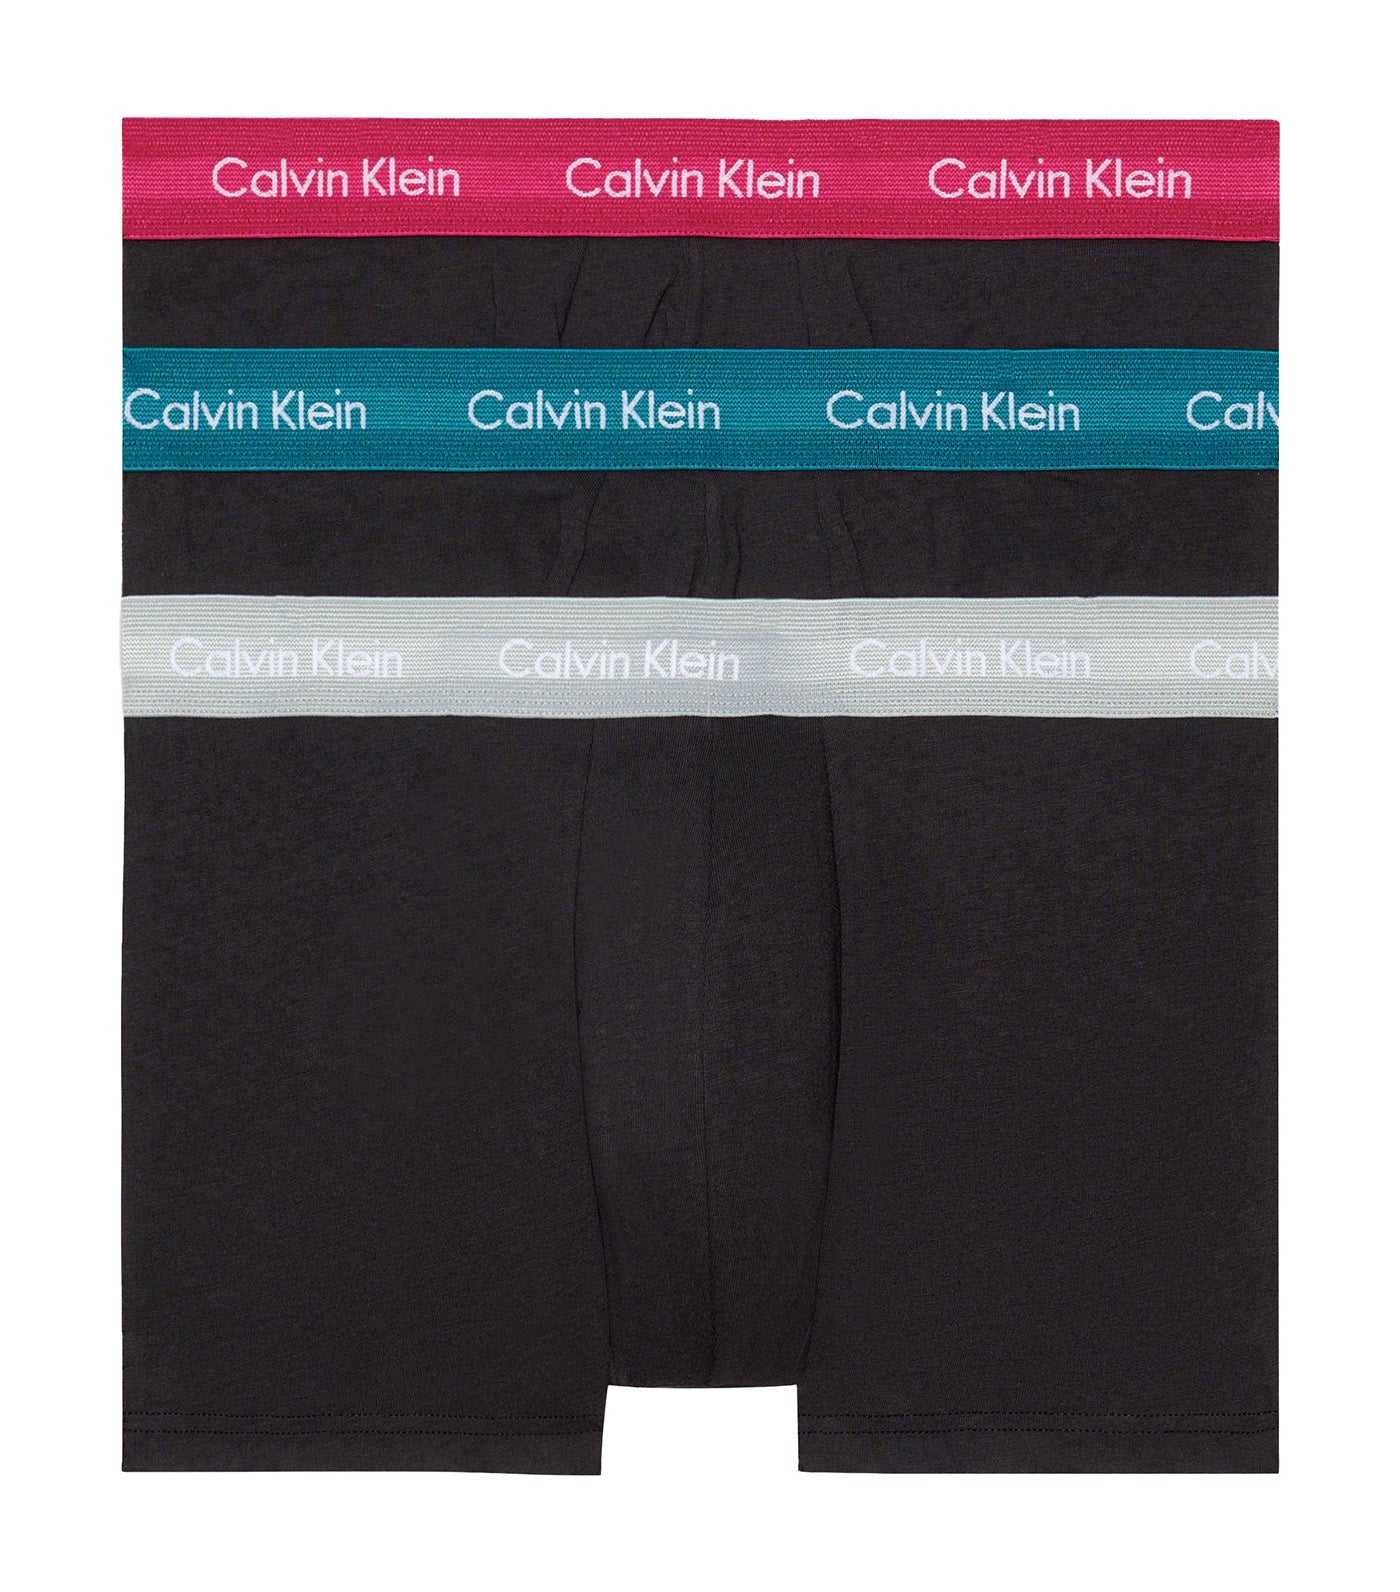 Cotton Stretch 3 Pack Low Rise Trunks Black